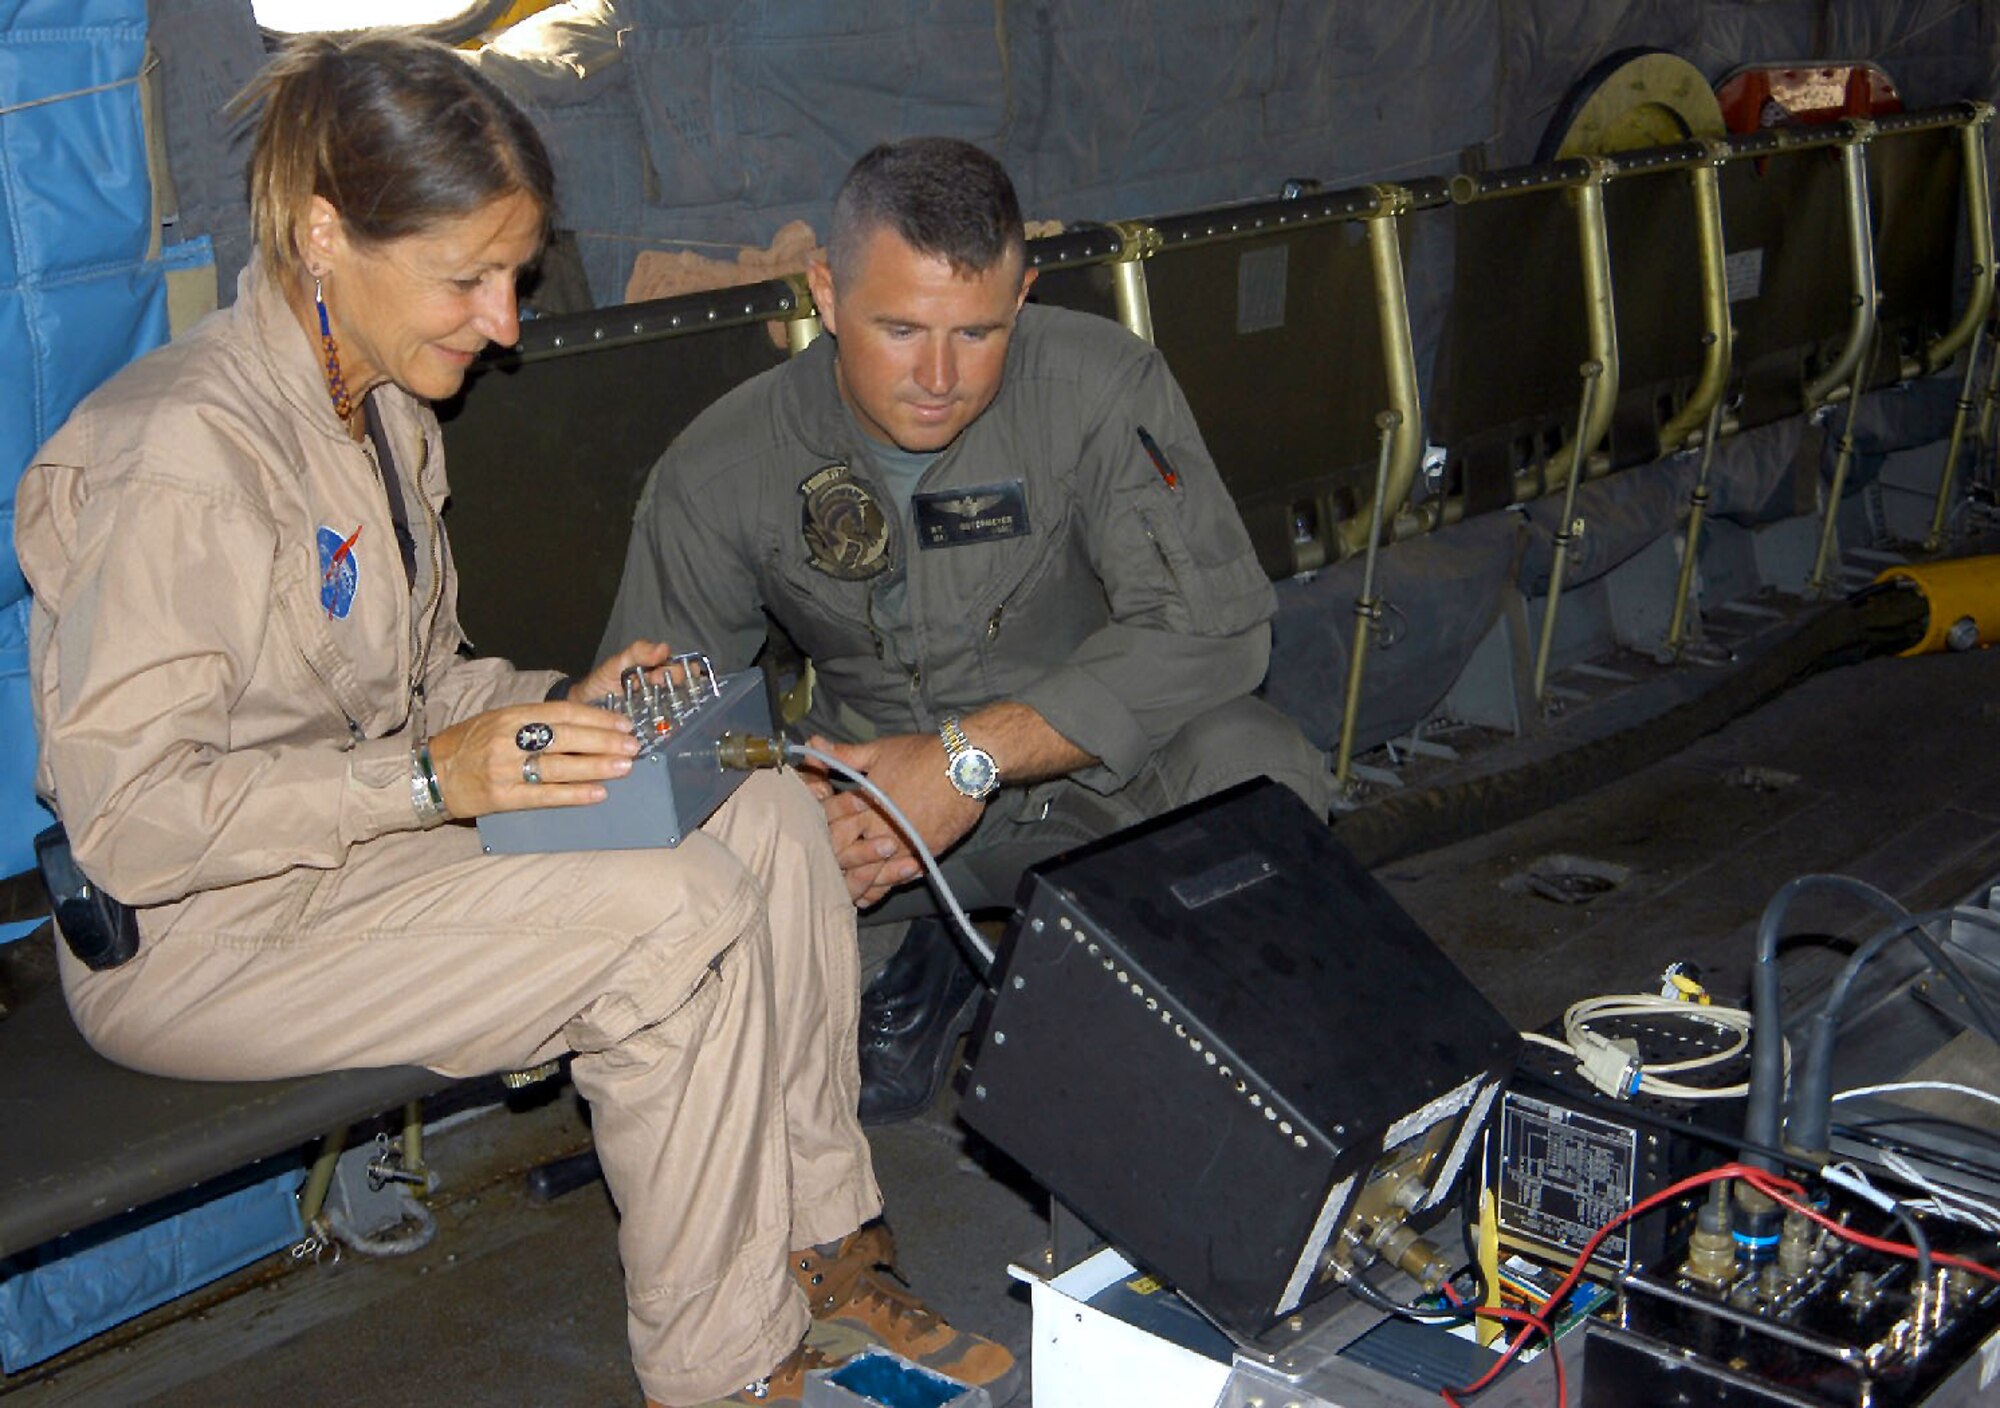 EDWARDS AIR FORCE BASE, Calif. -- Jeannette van den Bosch (left) and Marine Maj. Rick Ostermeyer check radar equipment.  Officials from the NASA Dryden Flight Research Center, Marine Heavy Helicopter Squadron 769 and the base's environmental management directorate are working to detect hazardous-waste sites.  Van den Bosch is a NASA Airborne Science Facility sensor manager, and Ostermeyer is a CH-53E helicopter pilot.  (U.S. Air Force photo by Airman 1st Class Wes Auldridge)